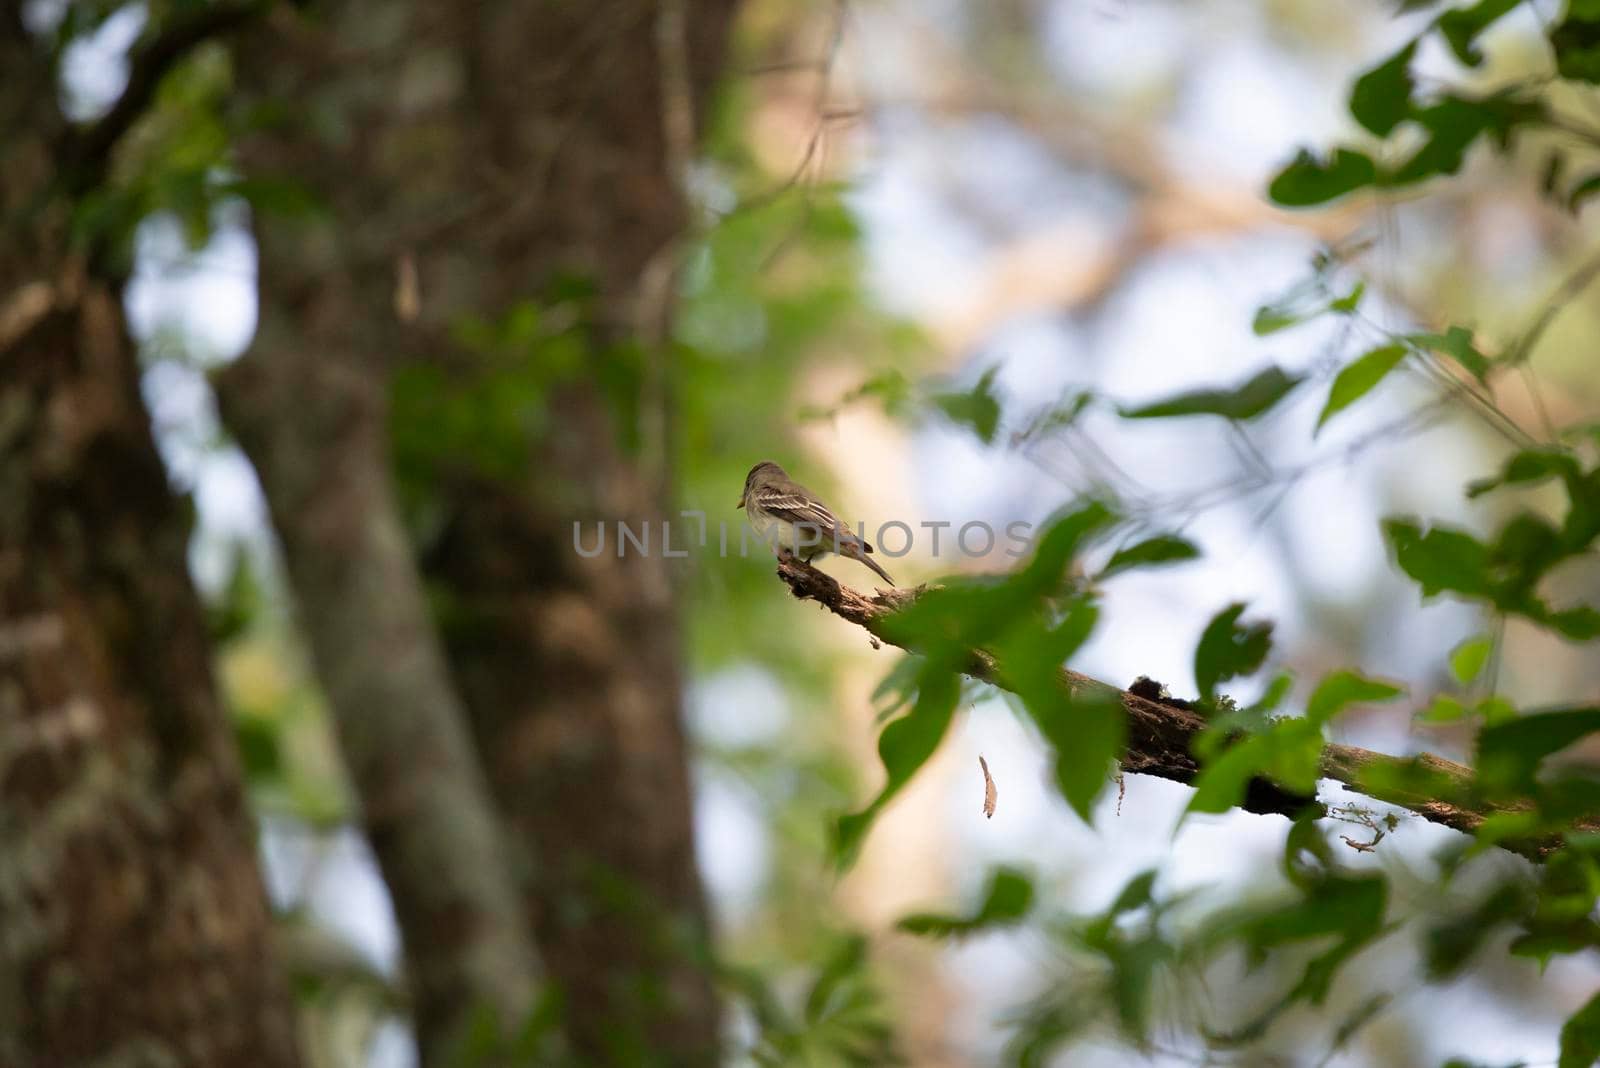 Eastern wood pewee (Contopus virens) looking around curiously from its perch on a tree limb